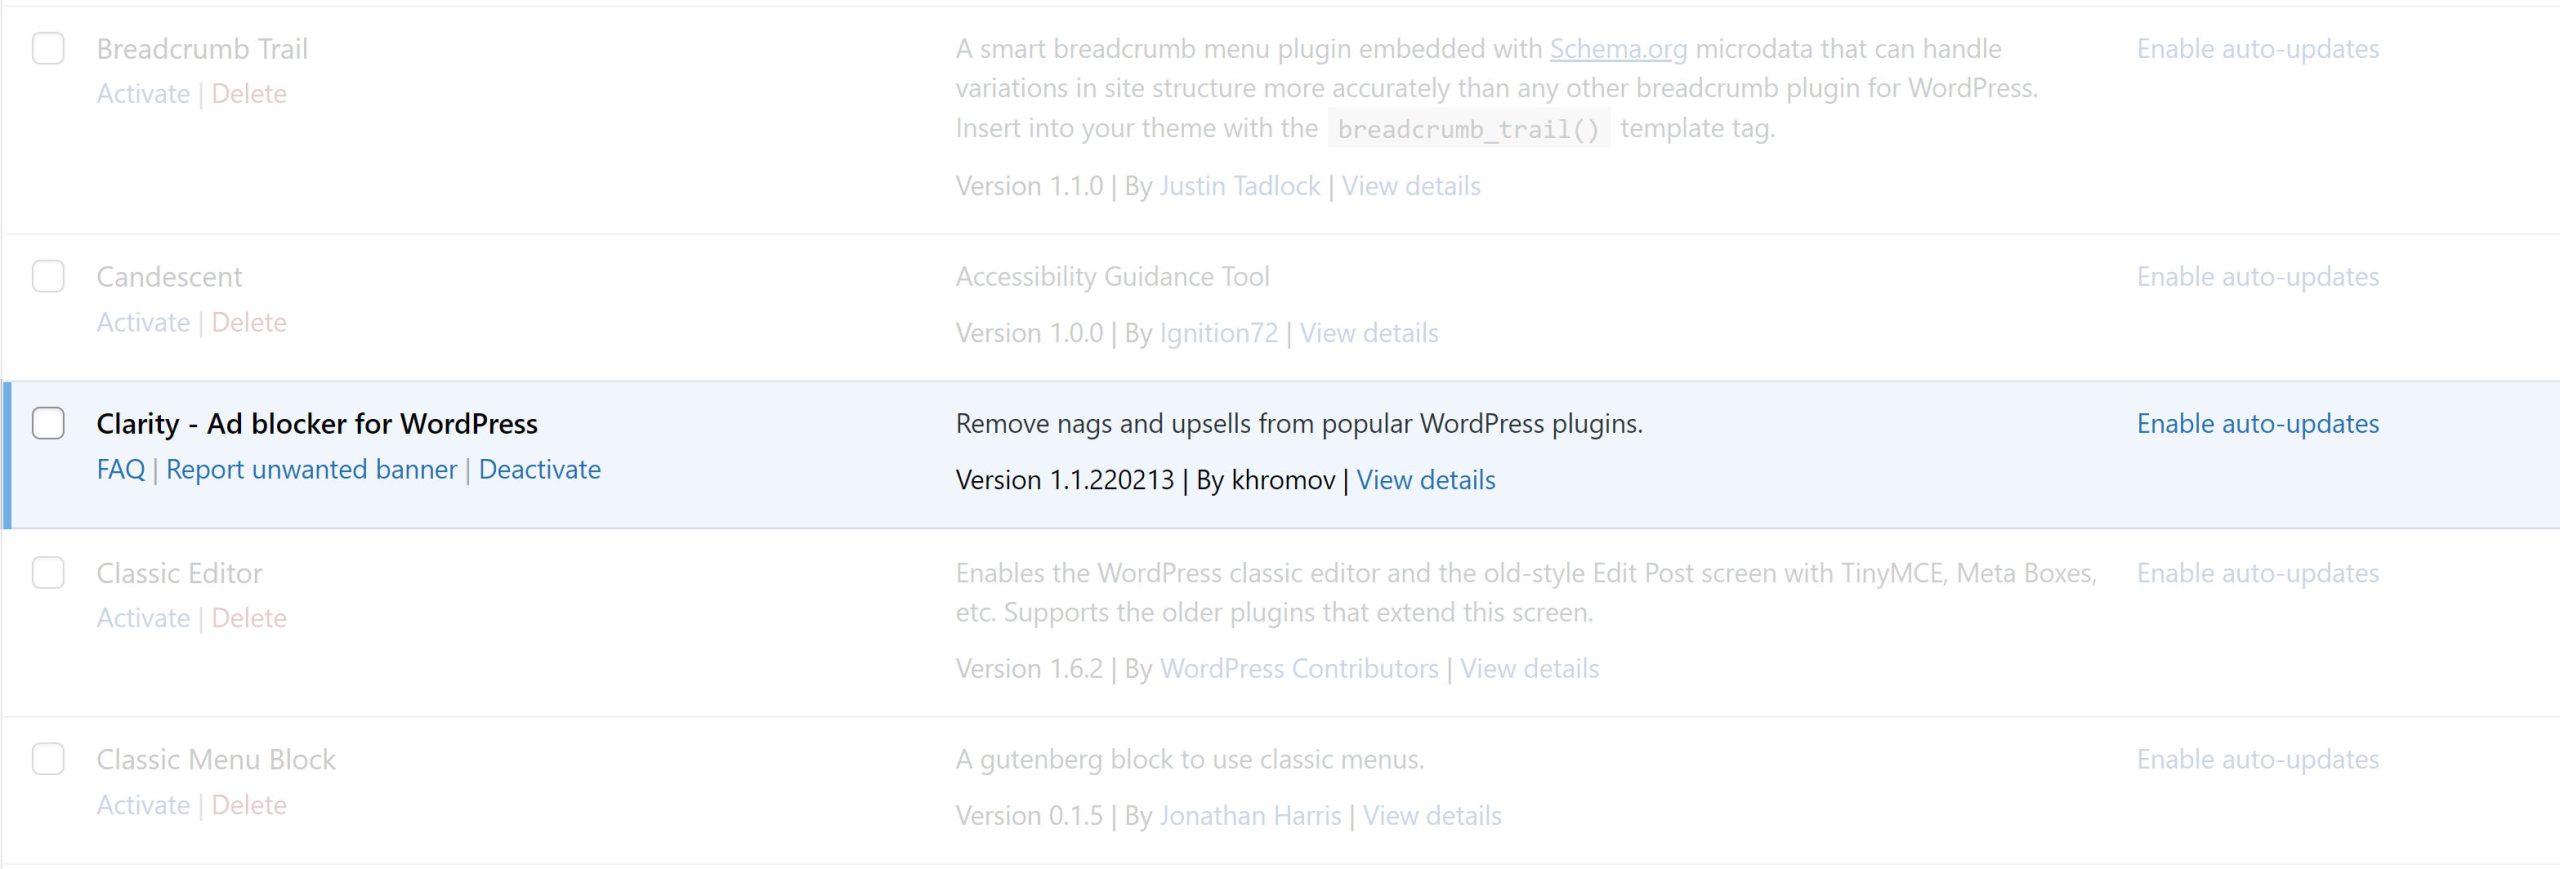 WordPress plugins management screen.  The Clarity plugin is highlighted, and it has an extra link to report and unwanted banner.